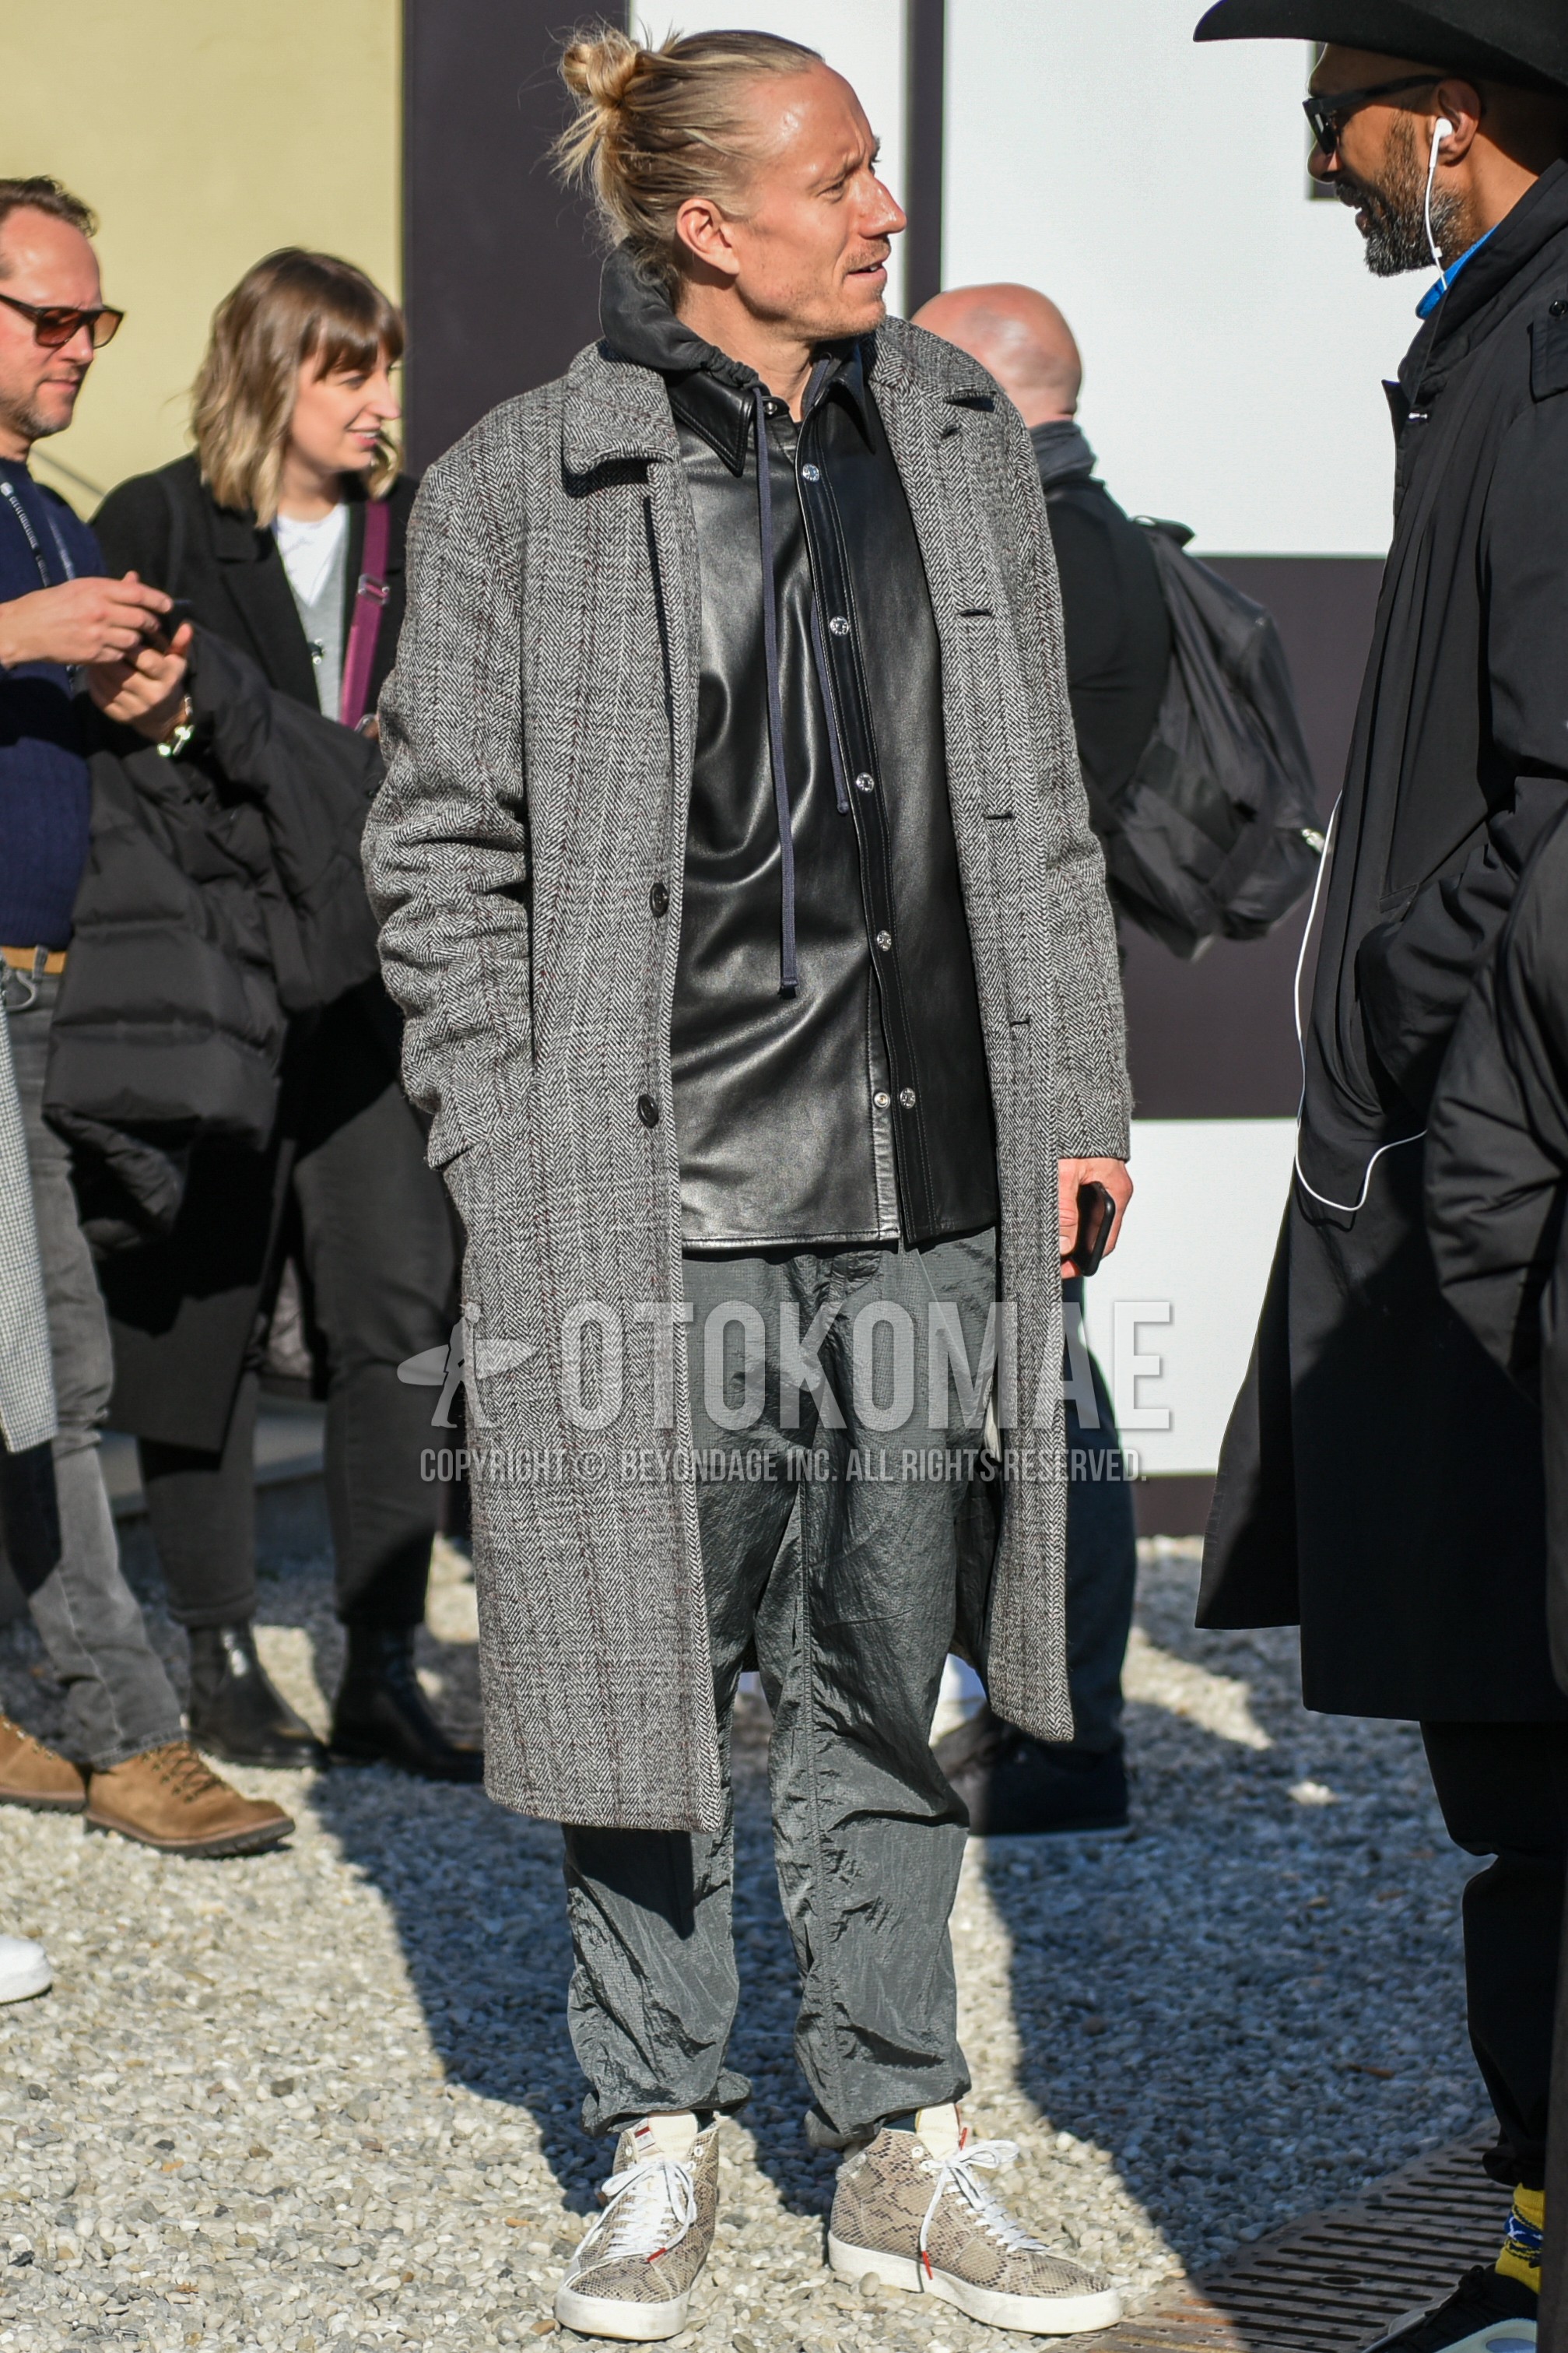 Men's winter outfit with gray check stenkarrer coat, black plain leather jacket, black plain hoodie, gray plain bottoms, gray high-cut sneakers.